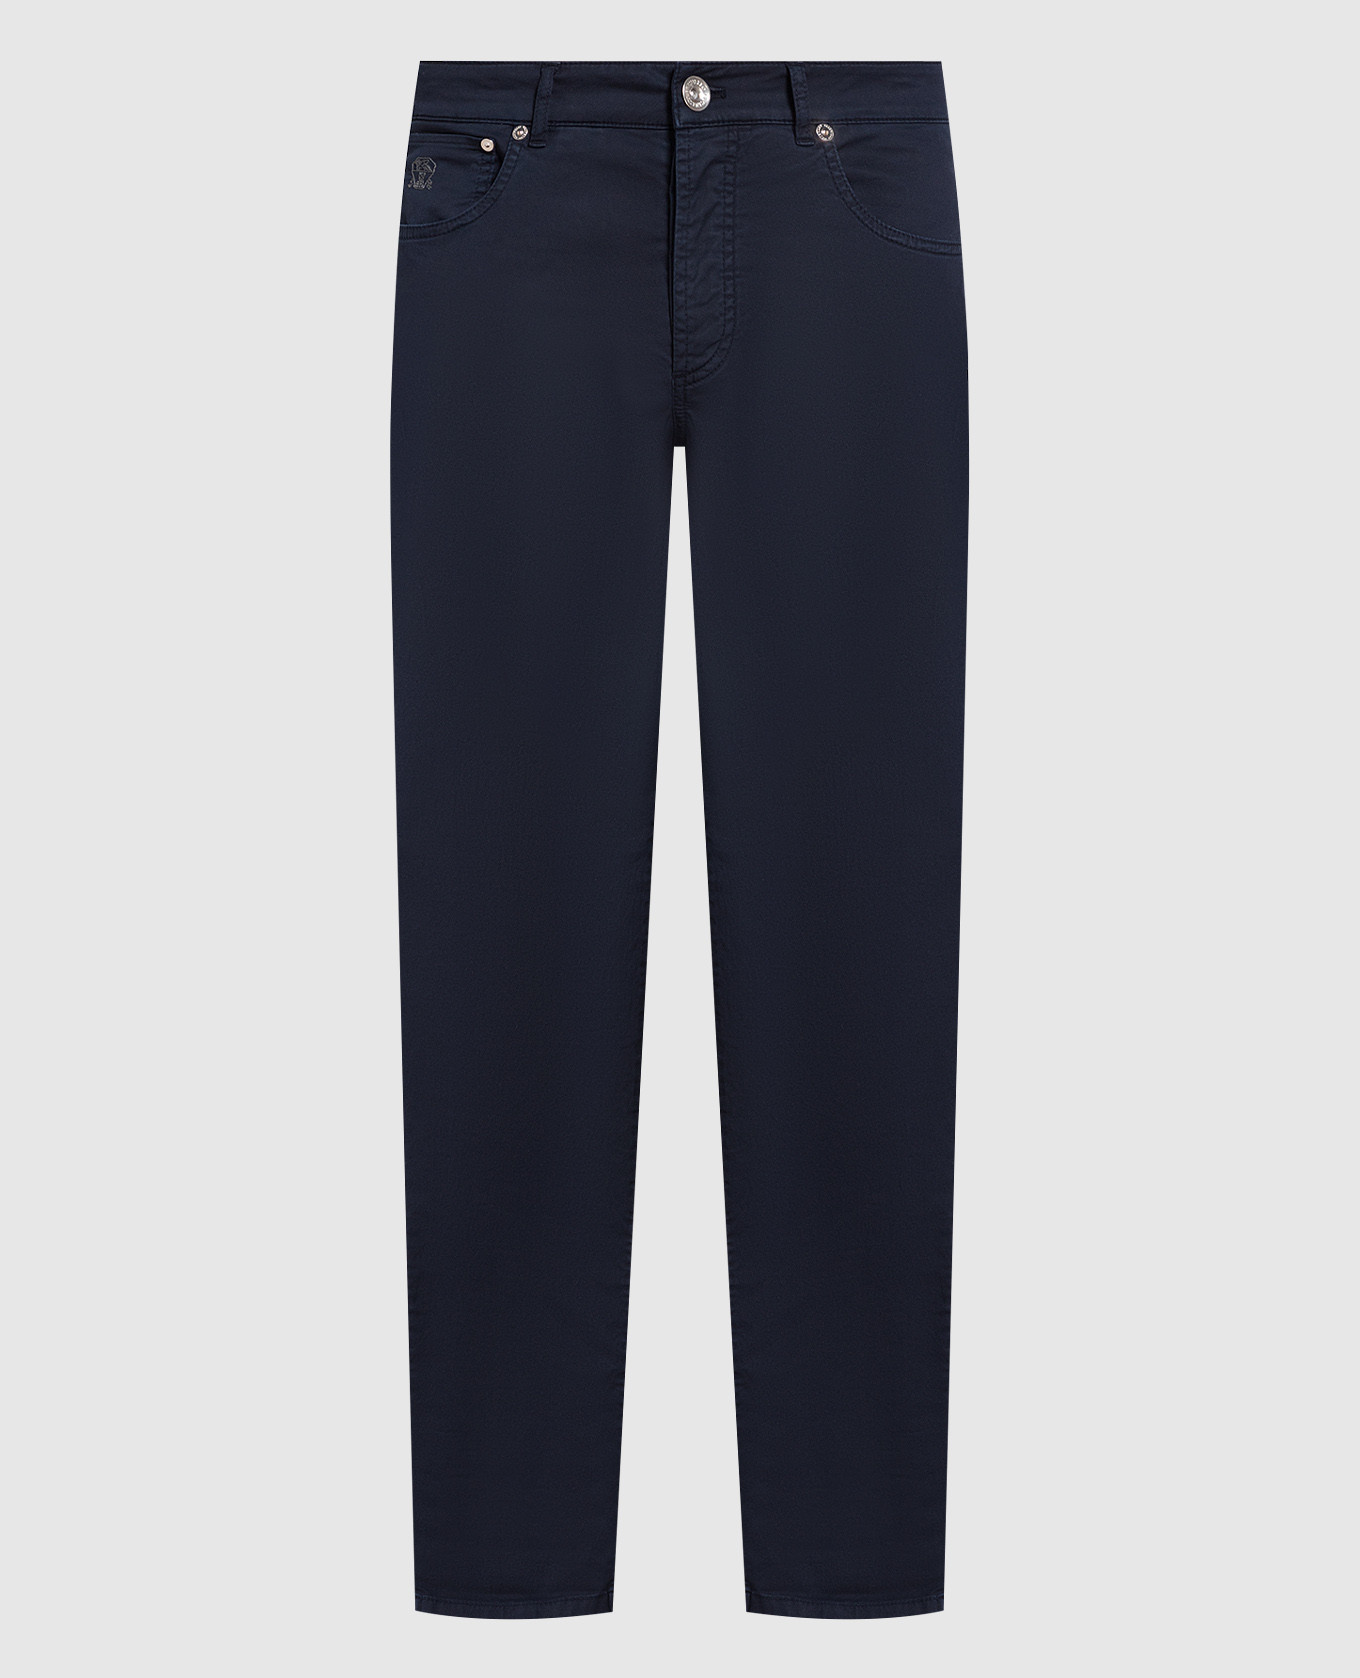 Blue pants with logo